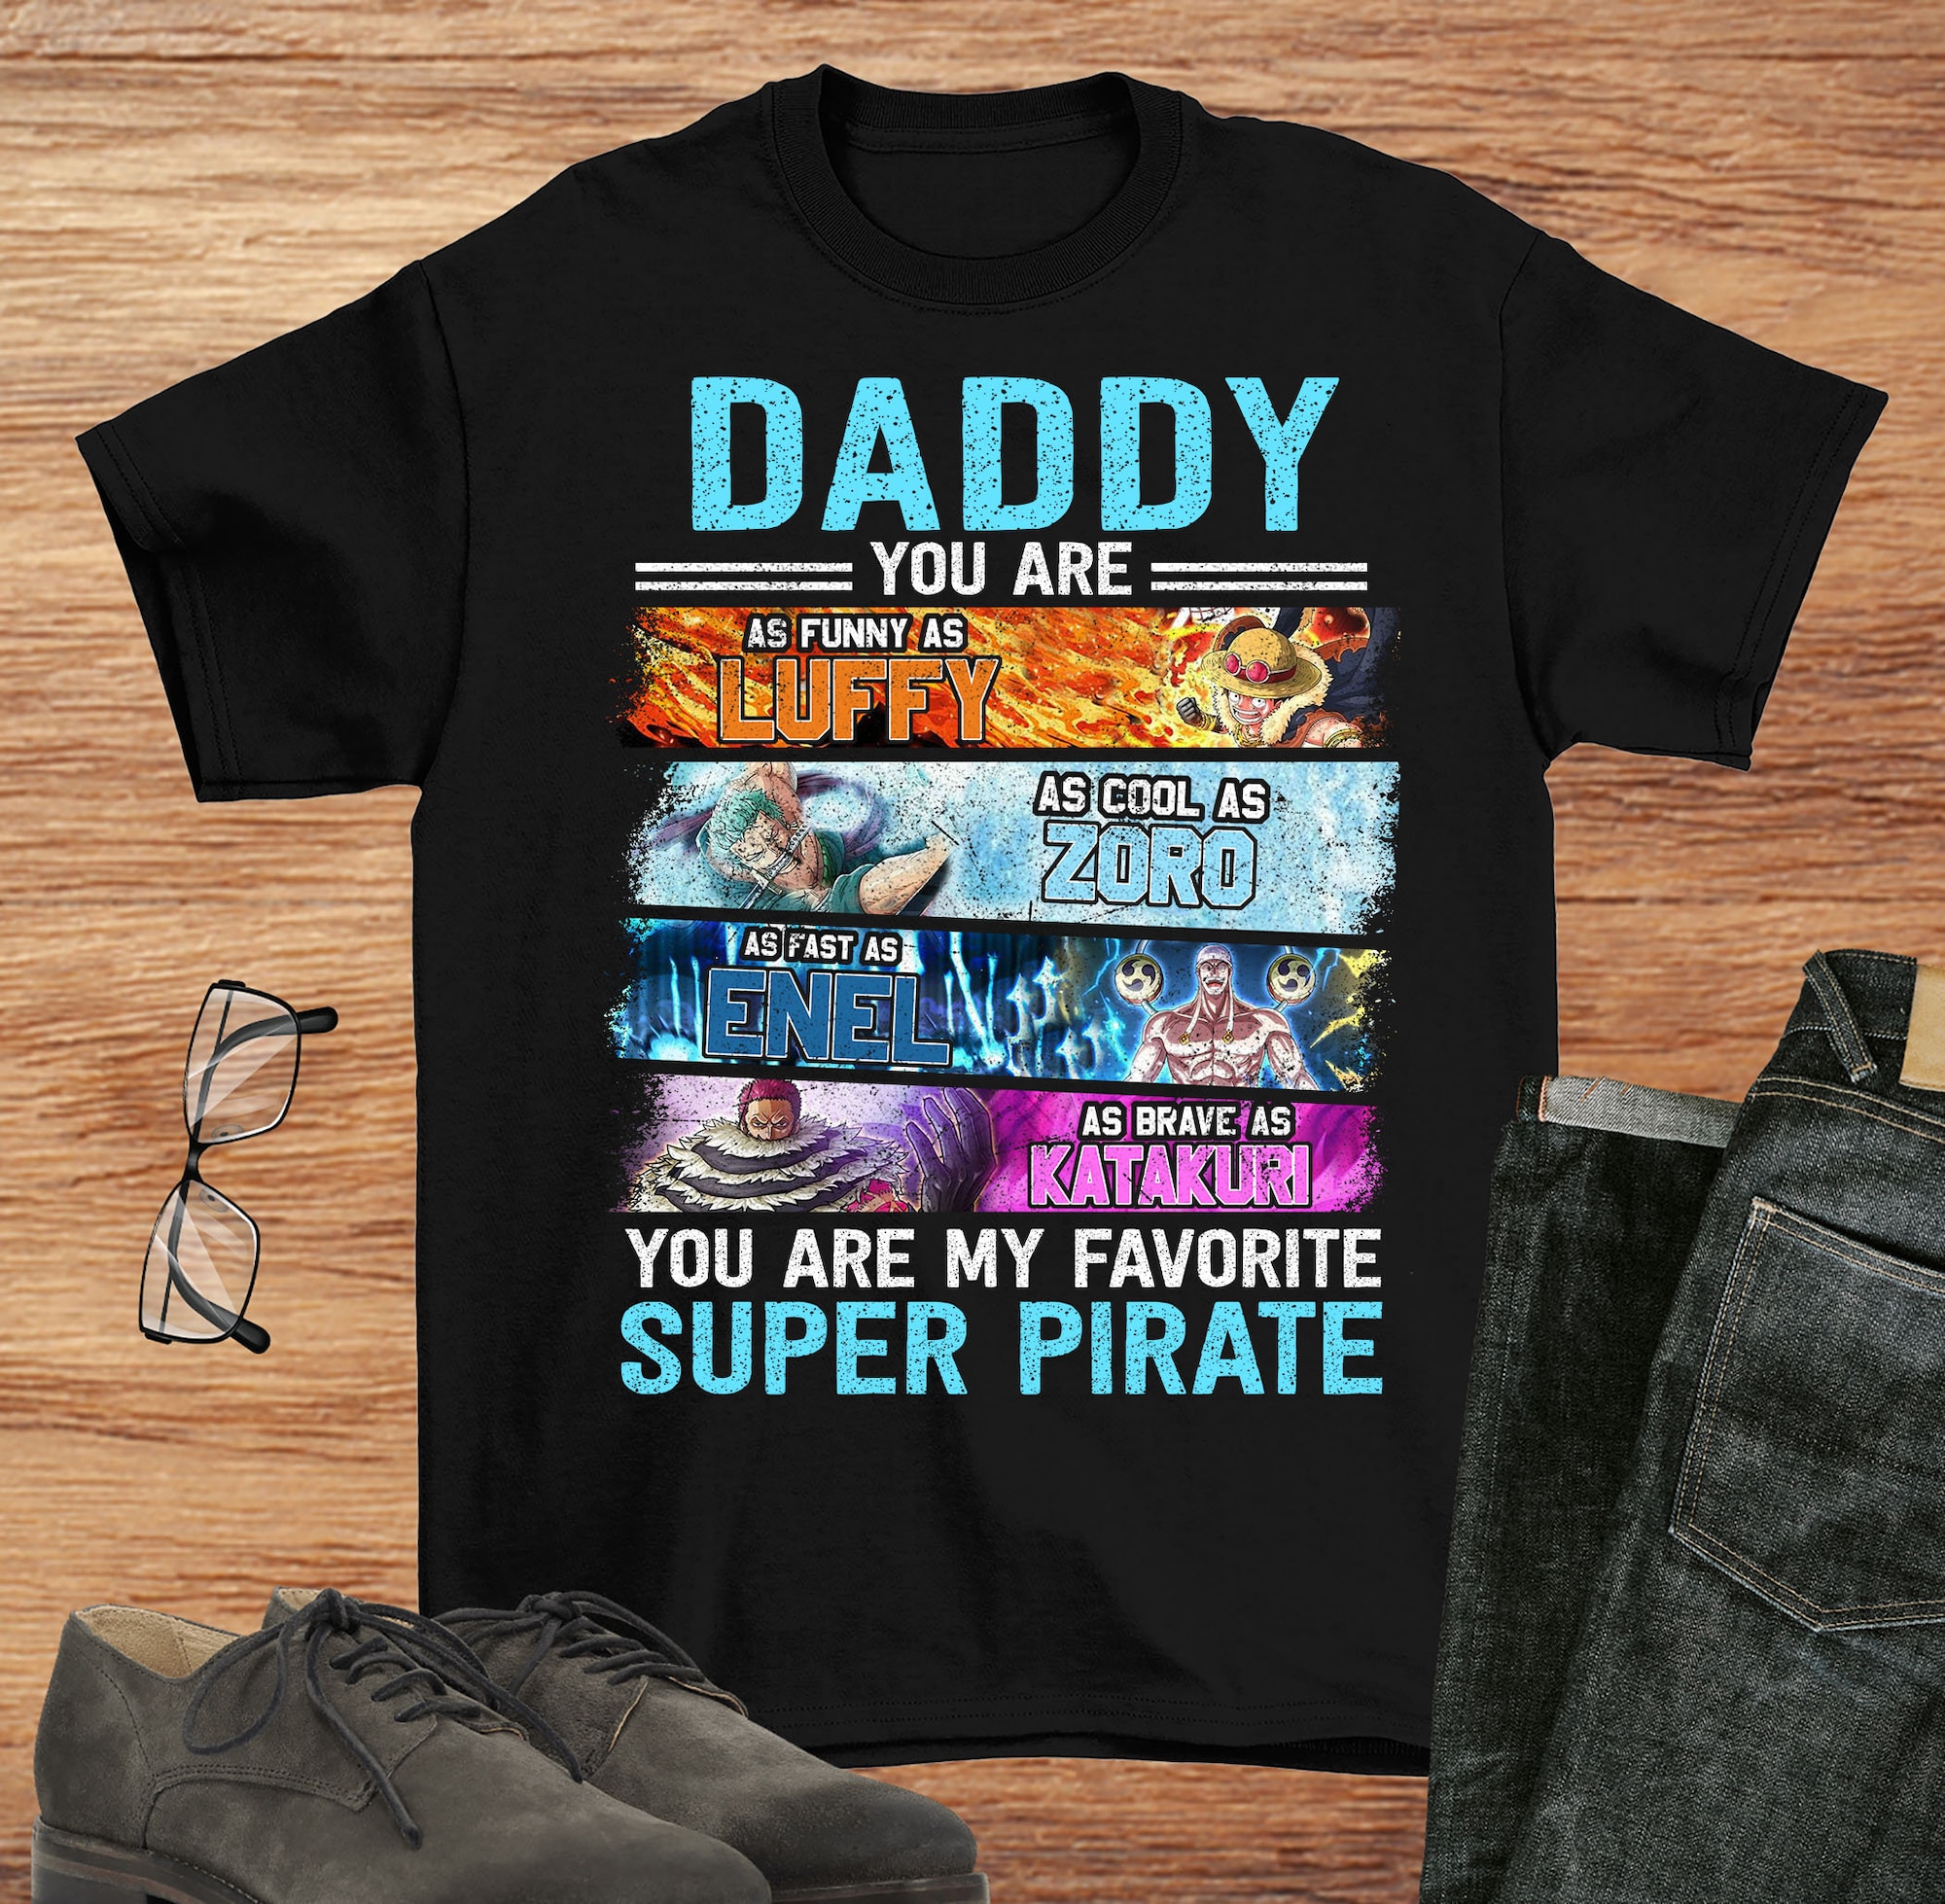 Fathers Day 2022, One Piece Shirt, Daddy you are my favorite pirate,Love One piece anime manga,